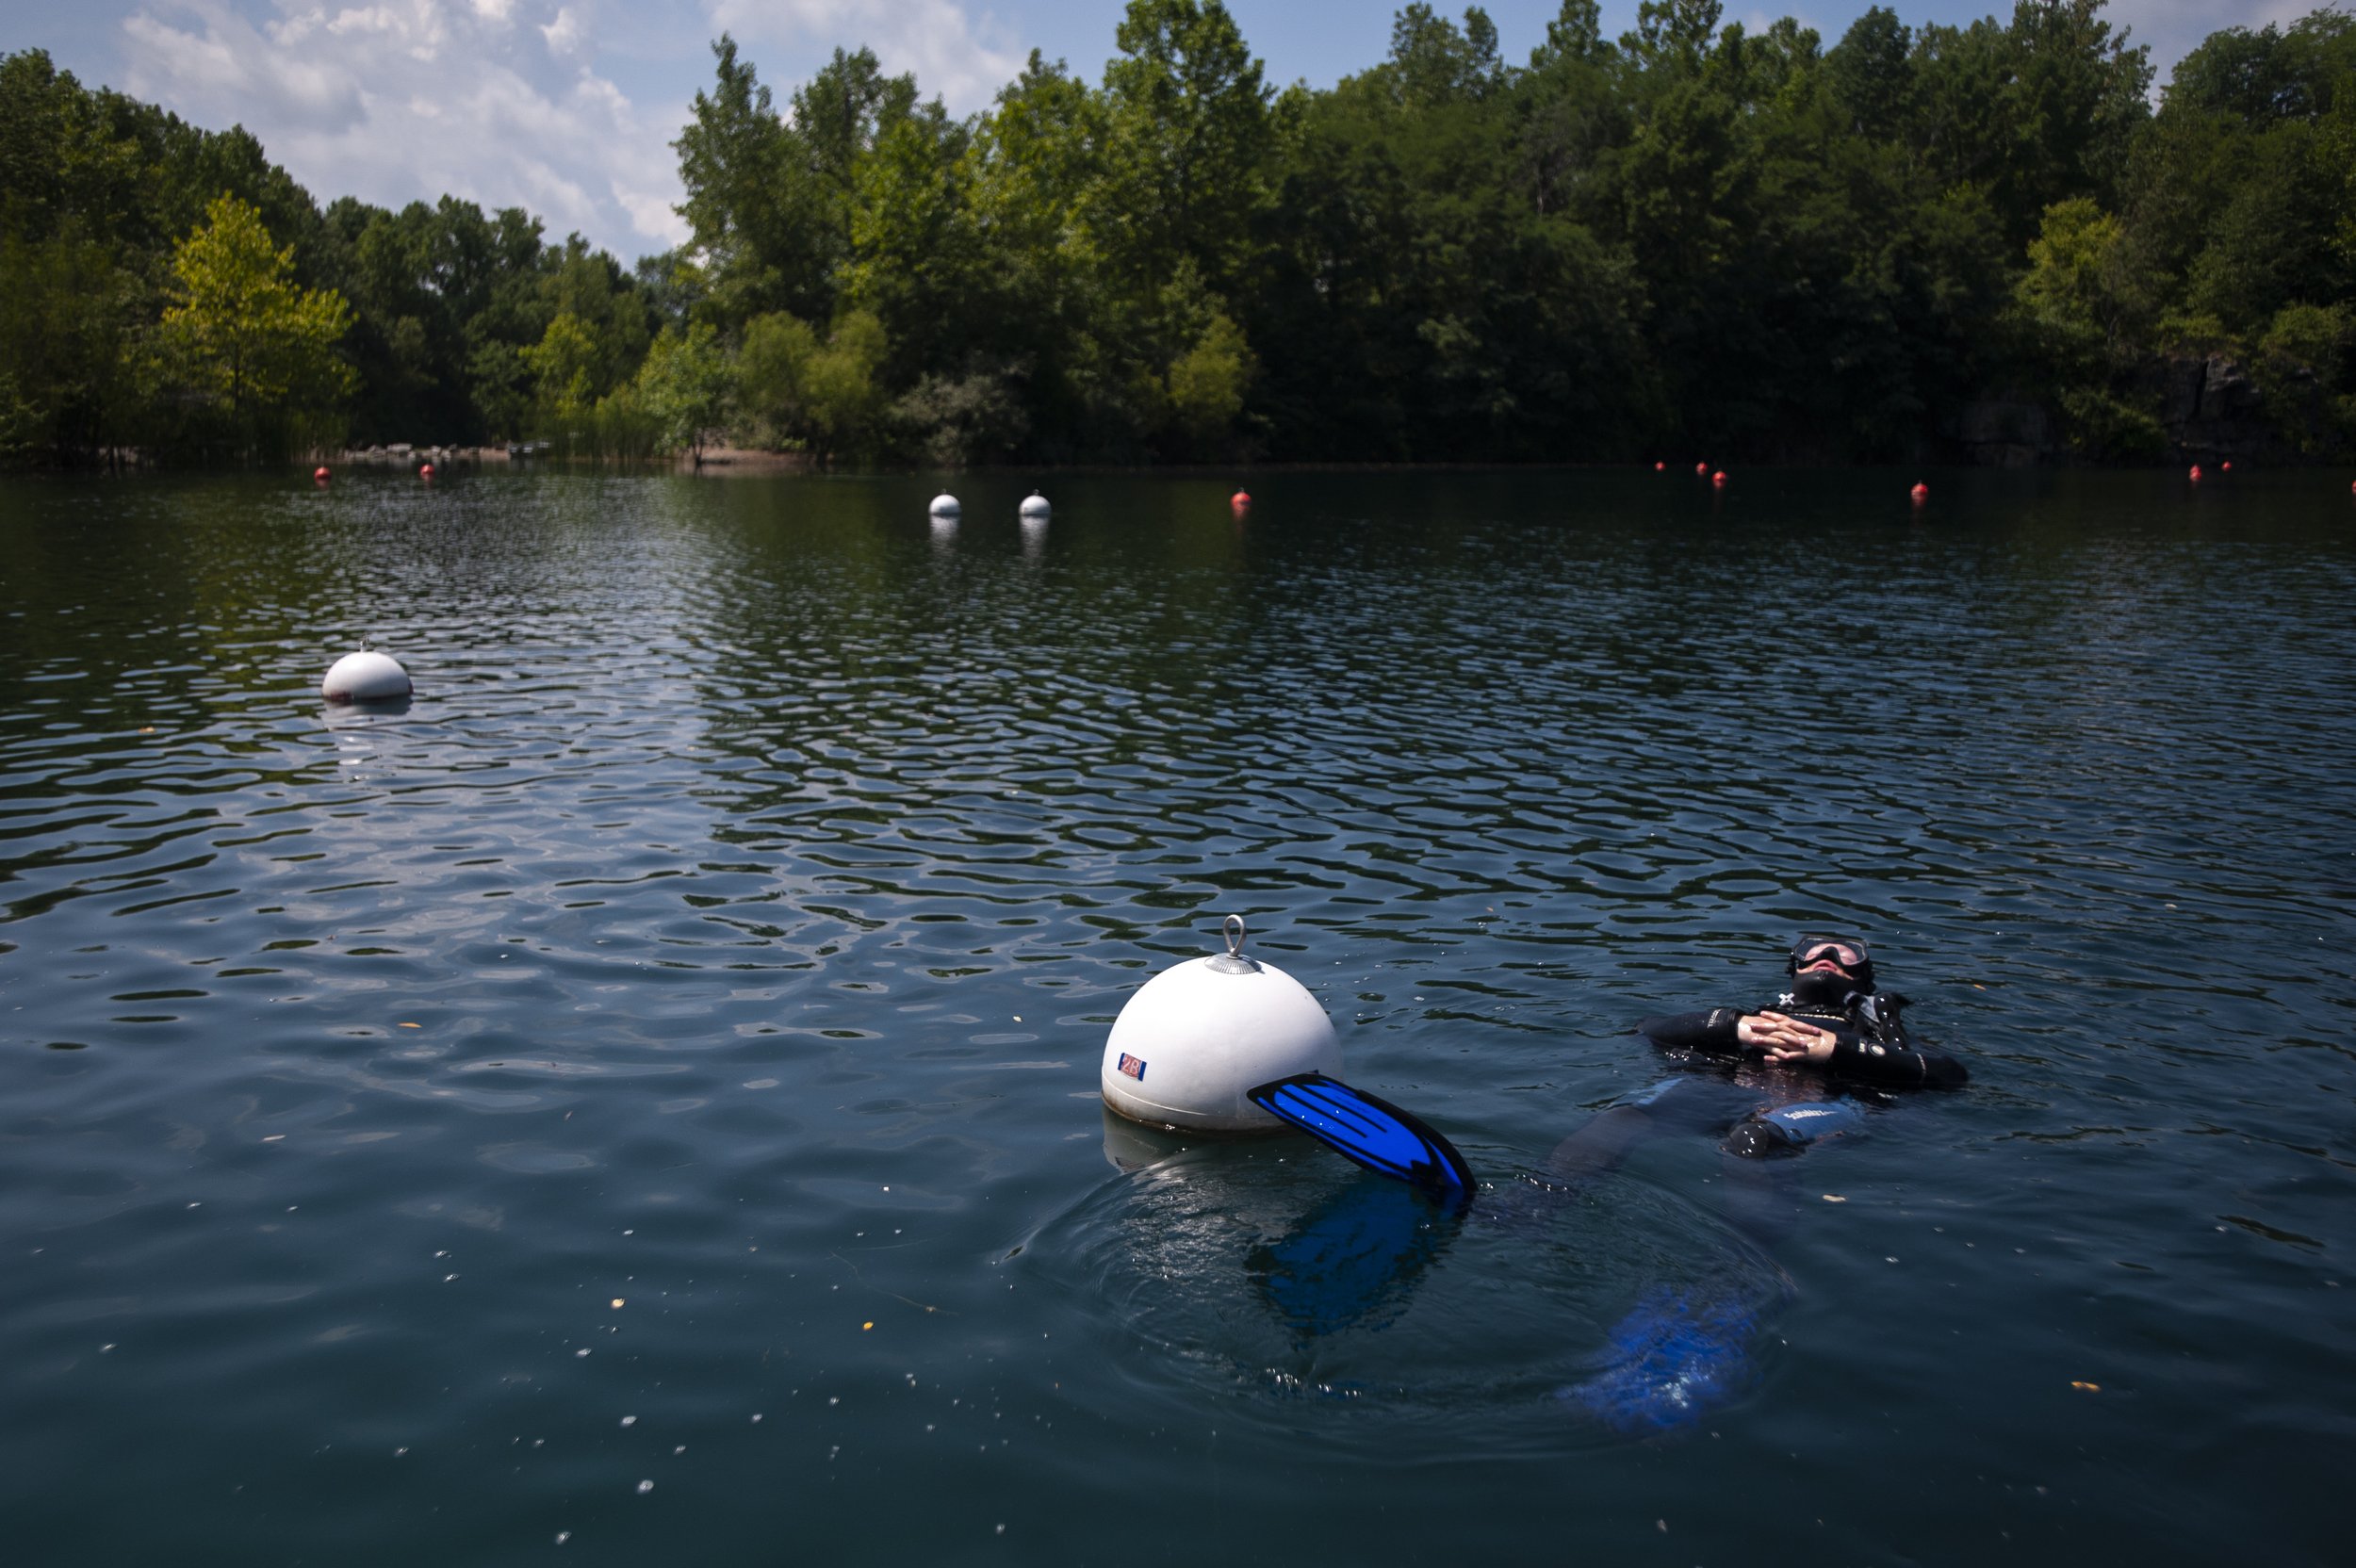  James Parris of Dexter, Missouri, floats in the water after the final scuba dive he needed to become a certified open water diver July 21 at Mermet Springs in Massac County, Illinois.  